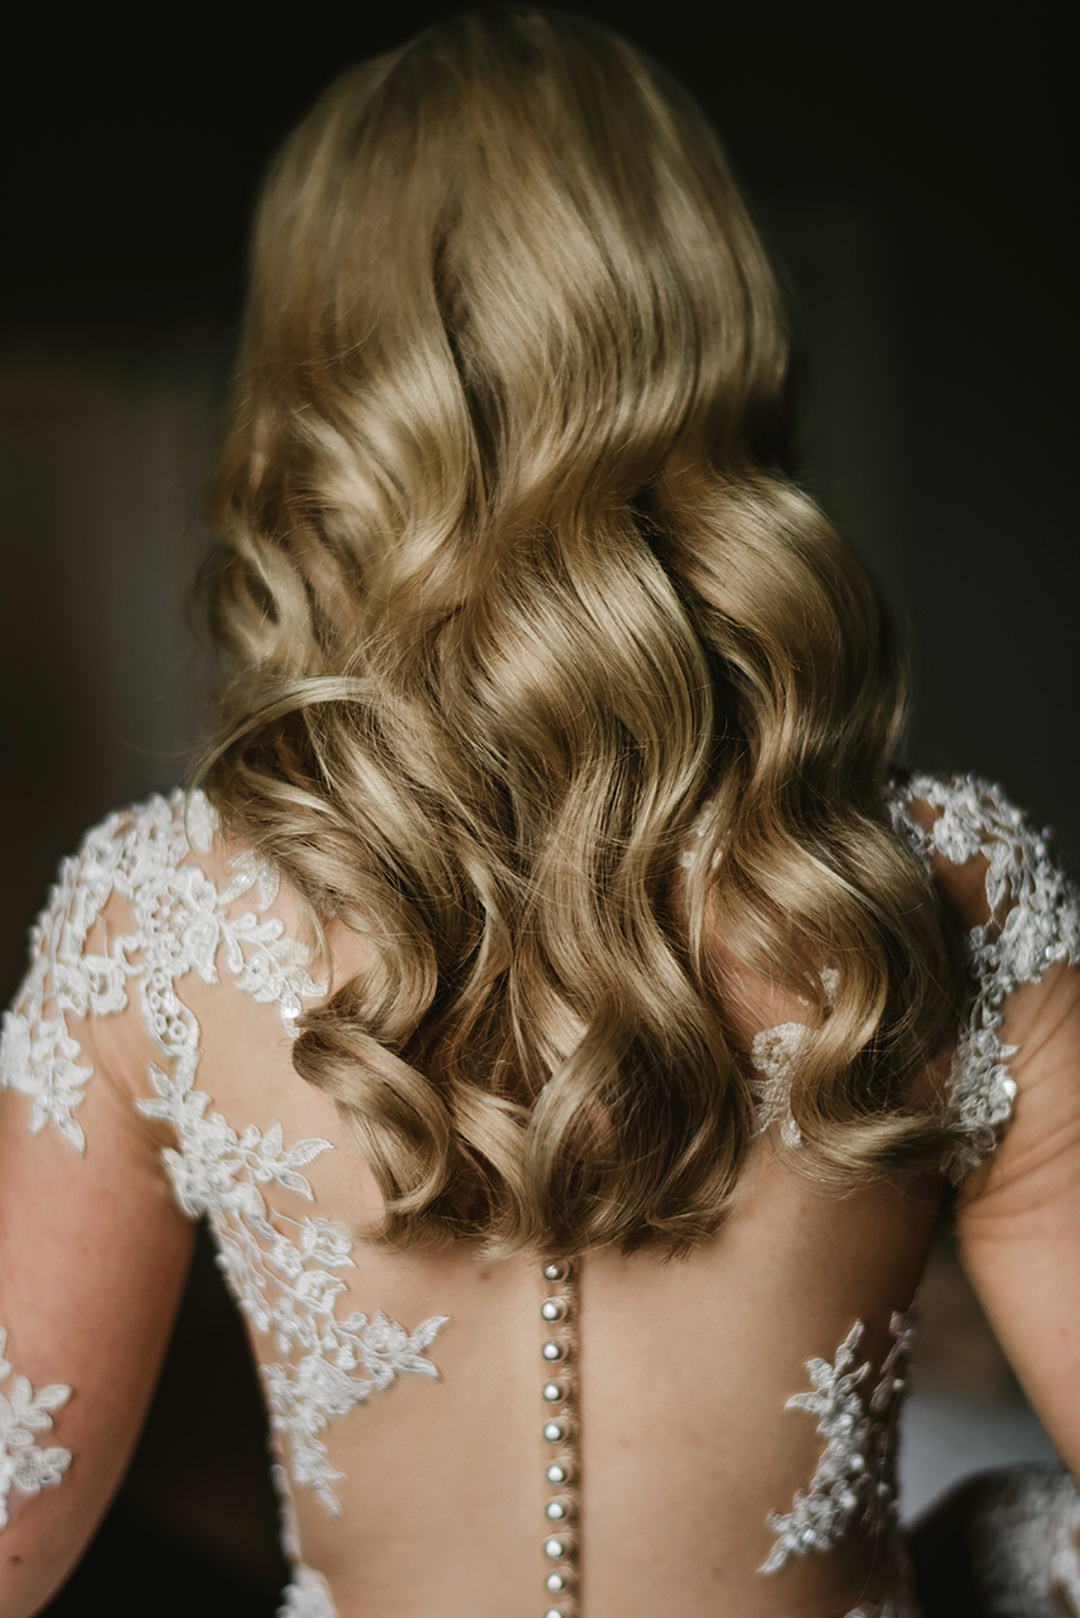 blond wavy hair seen from back